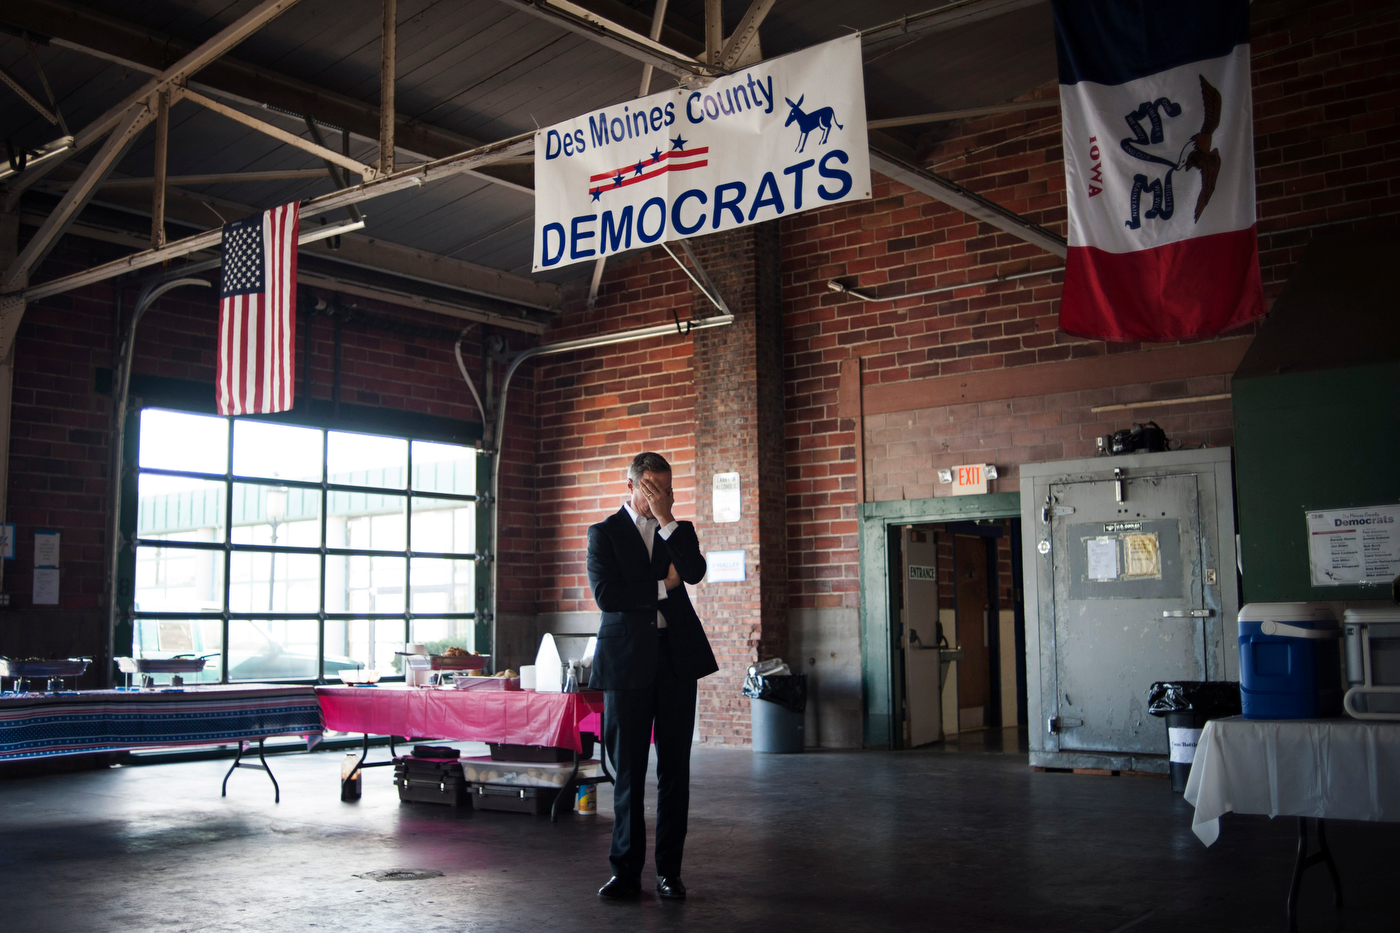  Democratic U.S. presidential candidate Maryland Governor Martin O'Malley listens to his introduction as he prepares to speak at the Des Moines County Democrats' fundraiser in Burlington, Iowa on November 7, 2015.  